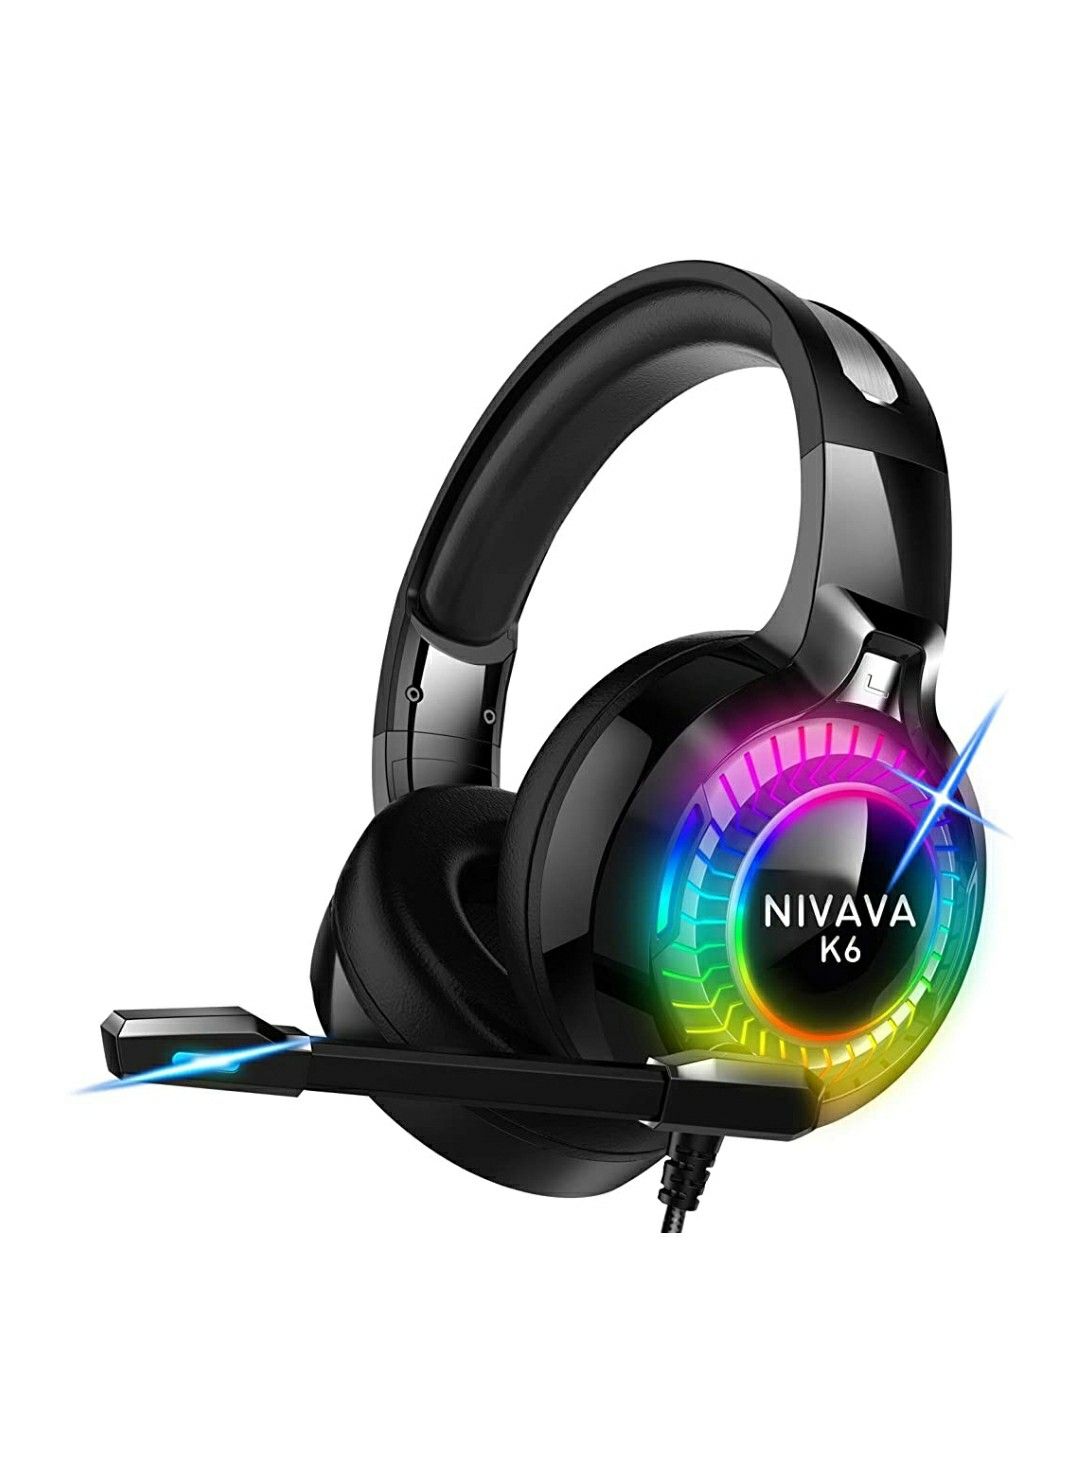 Nivava K6 pro gaming headset For PS4, Xbox One, PC Headphones With Mic LED